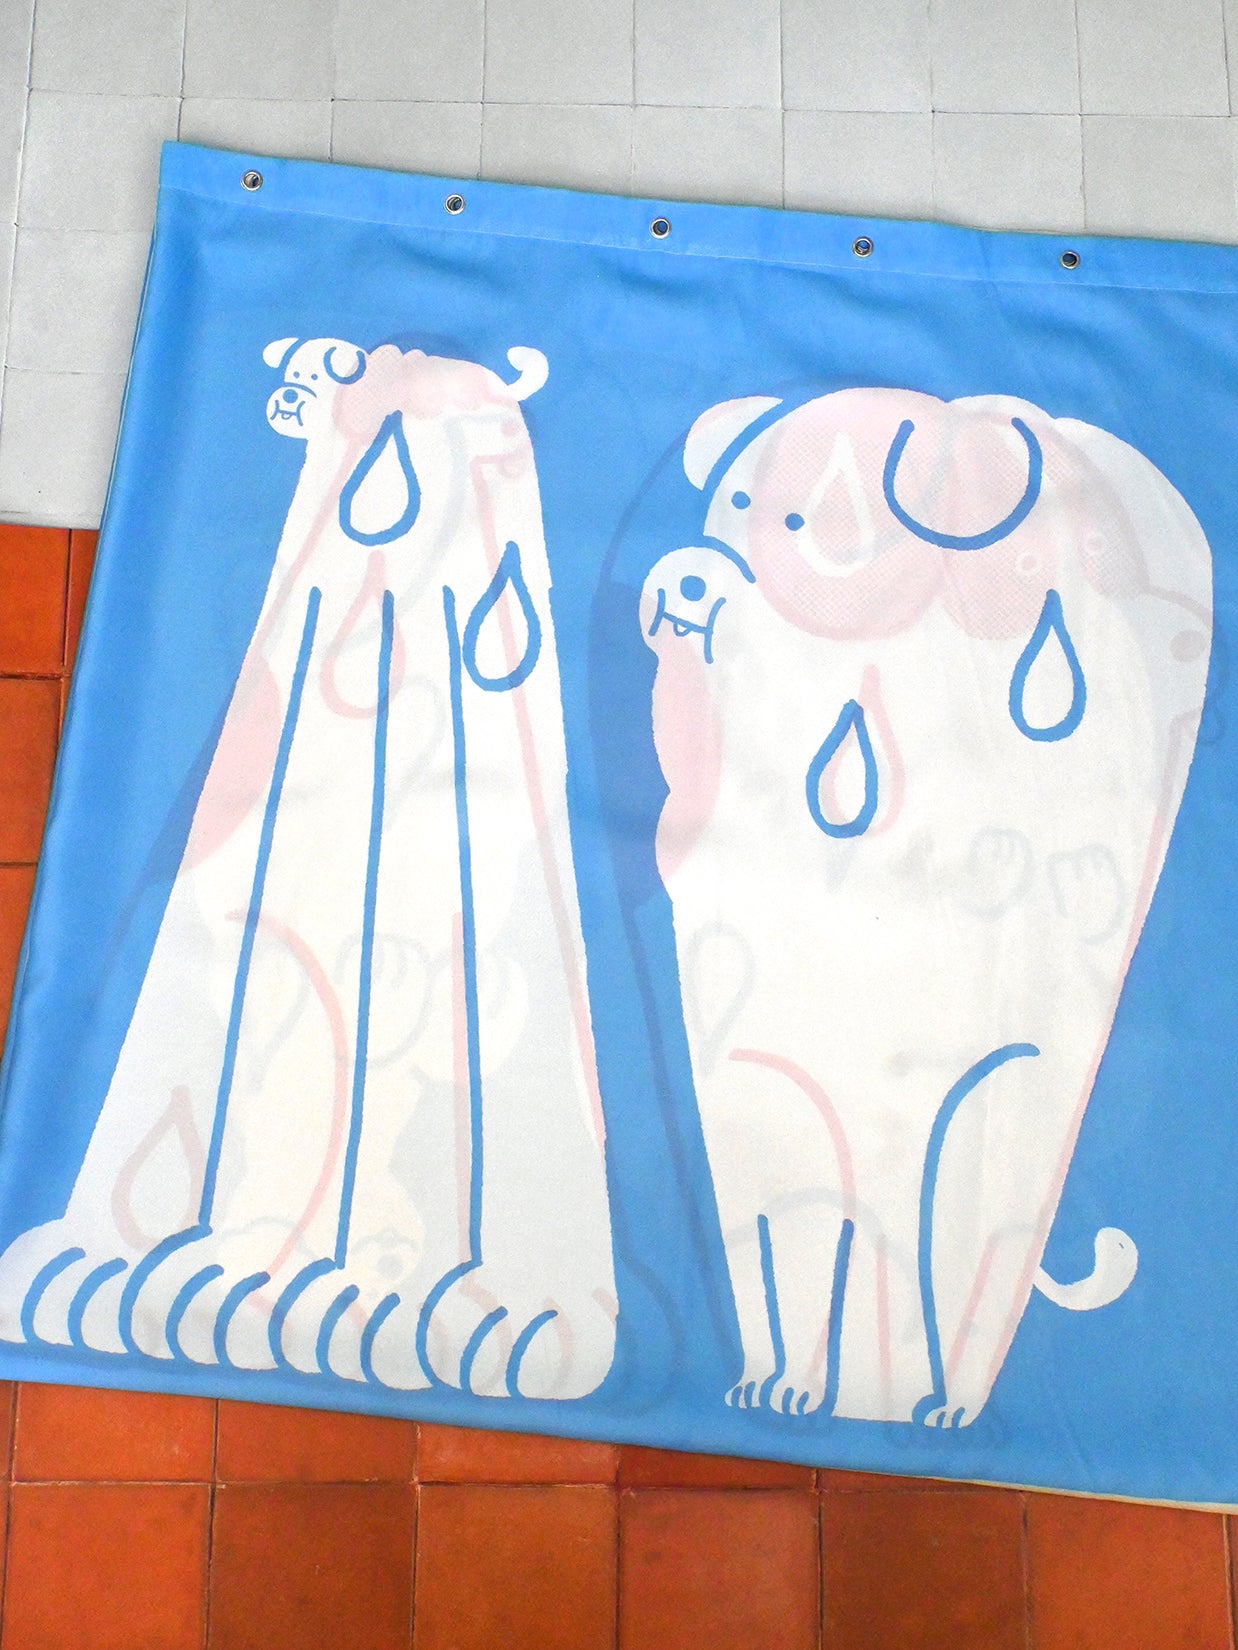 Part of the "Wet Dogs" bath collection by illustrator Natali Koromoto. "Wet Dogs" shower curtain.